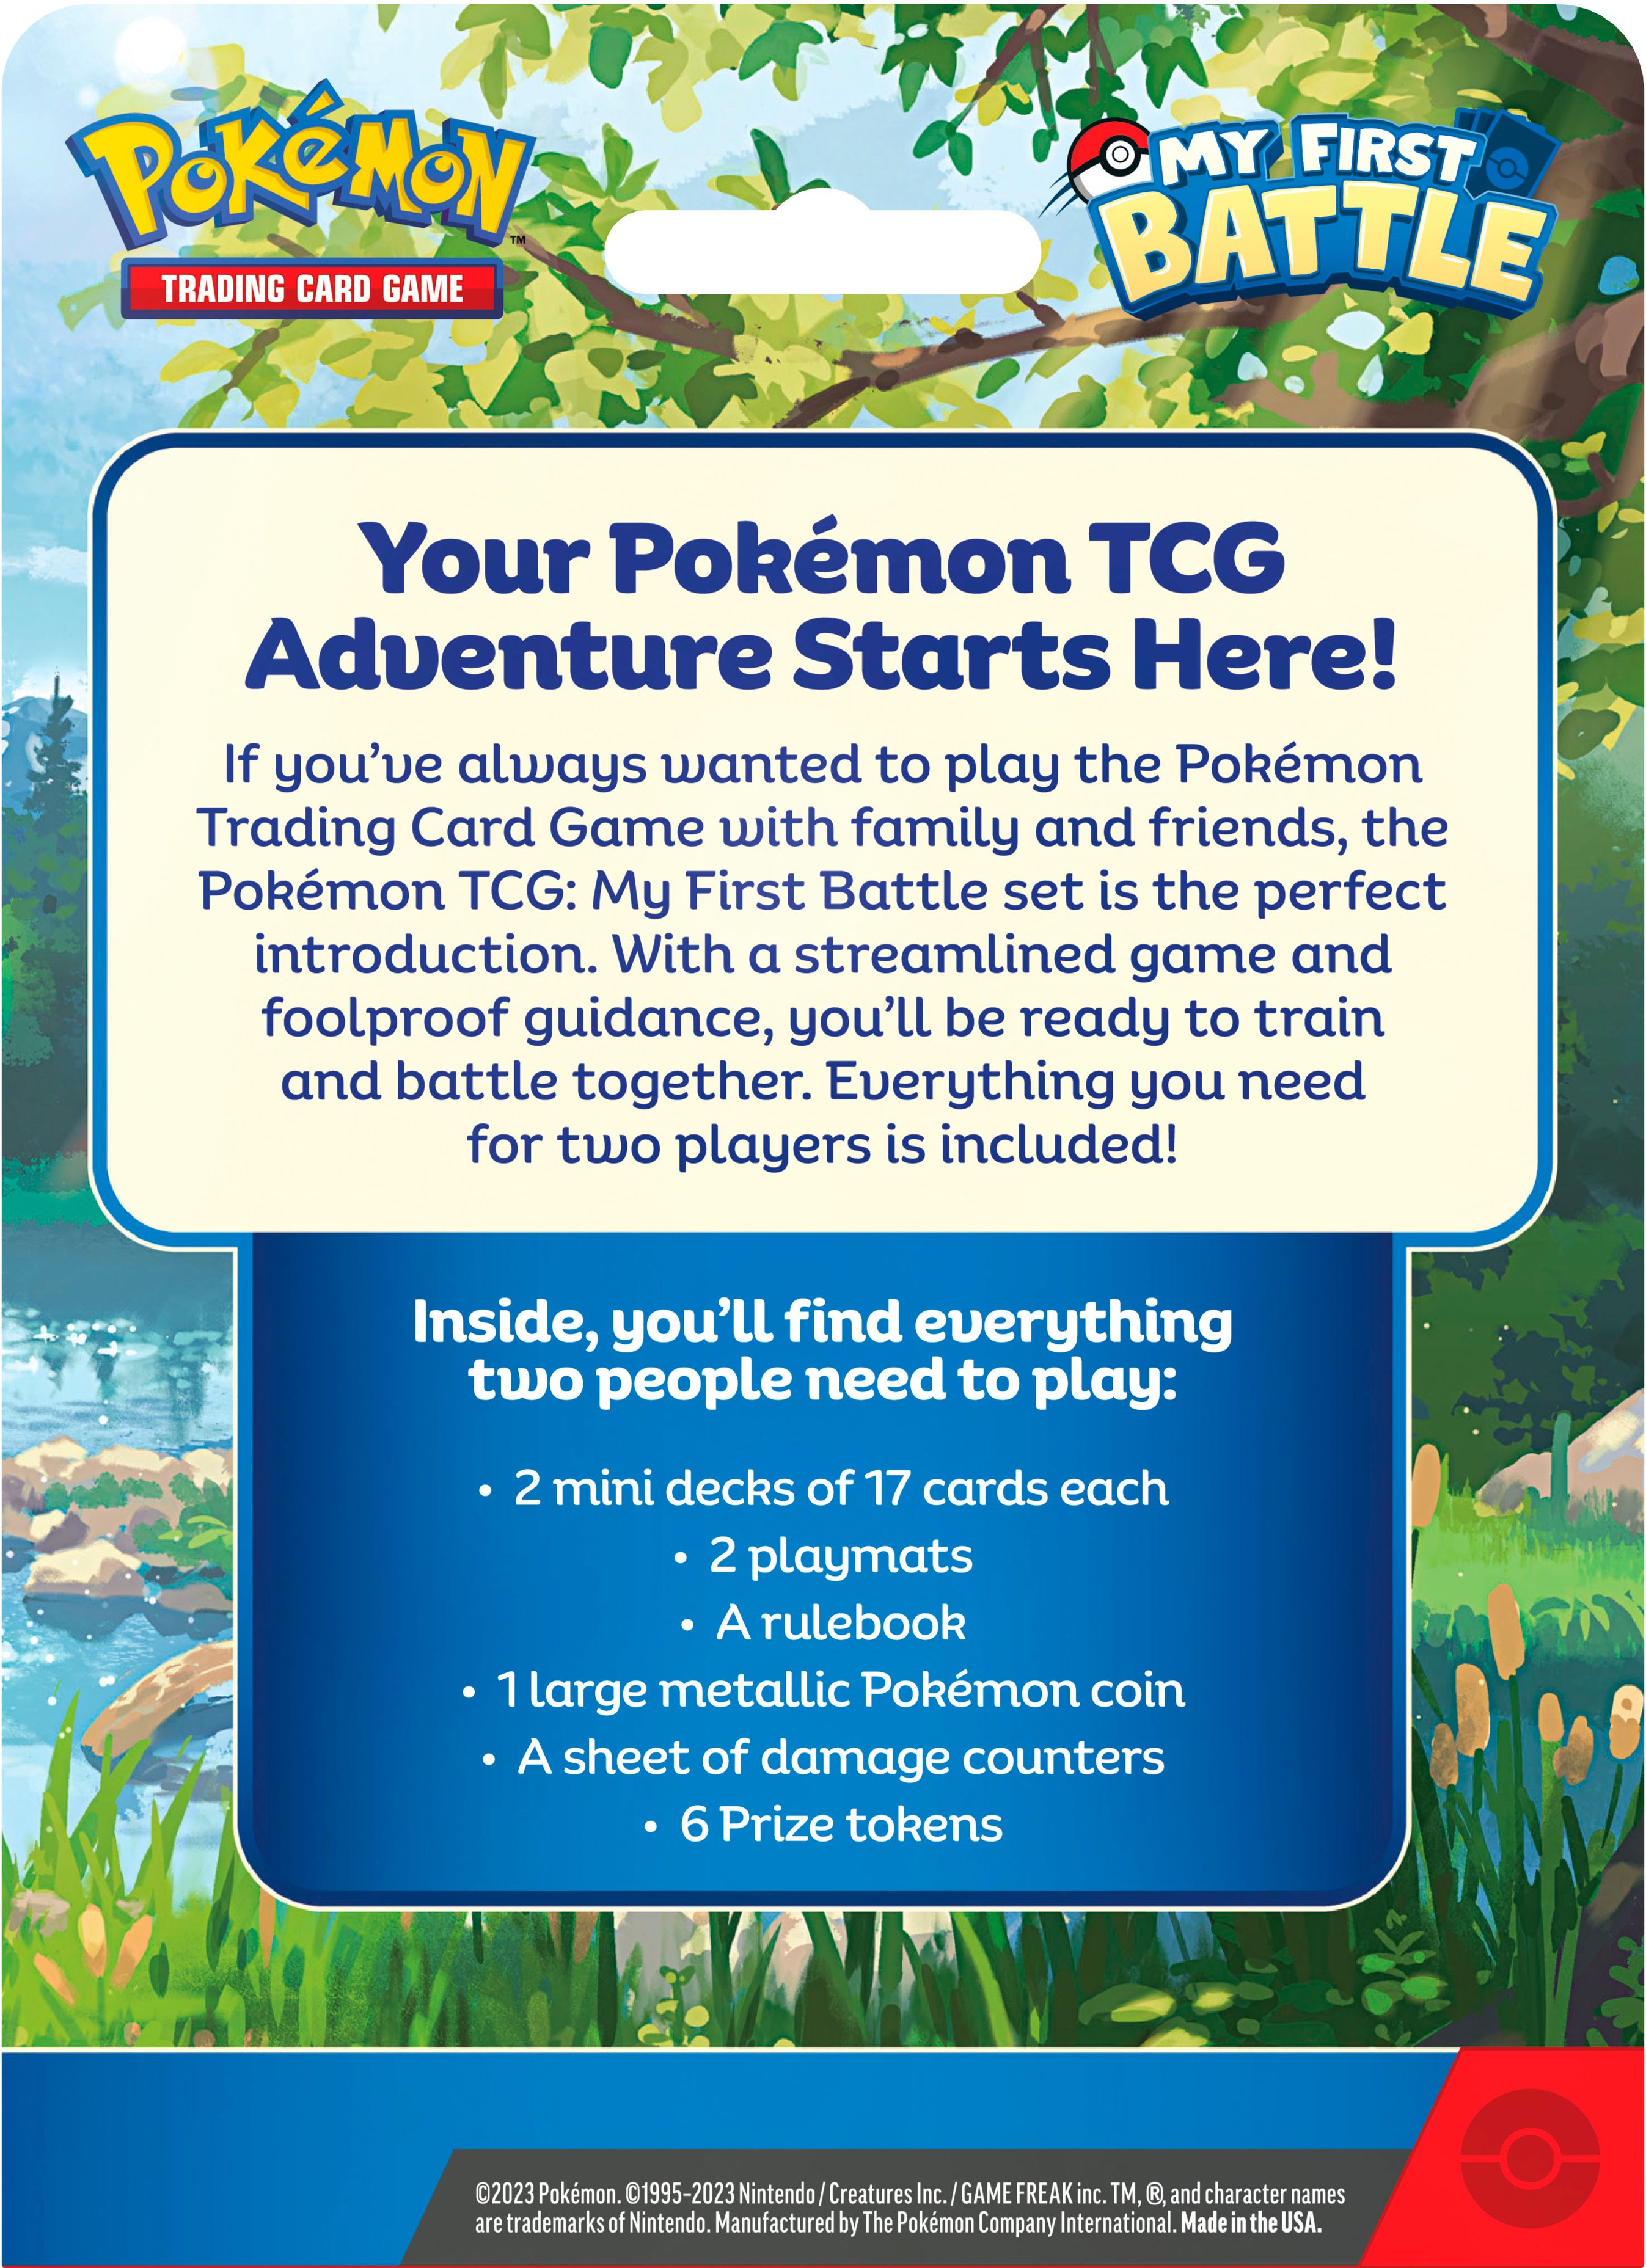 The Little Things on Instagram: Go back to the beginning with Pokémon  Trading Card Game Classic! Experience the timeless joy of the Pokémon TCG  with Pokémon Trading Card Game Classic — a